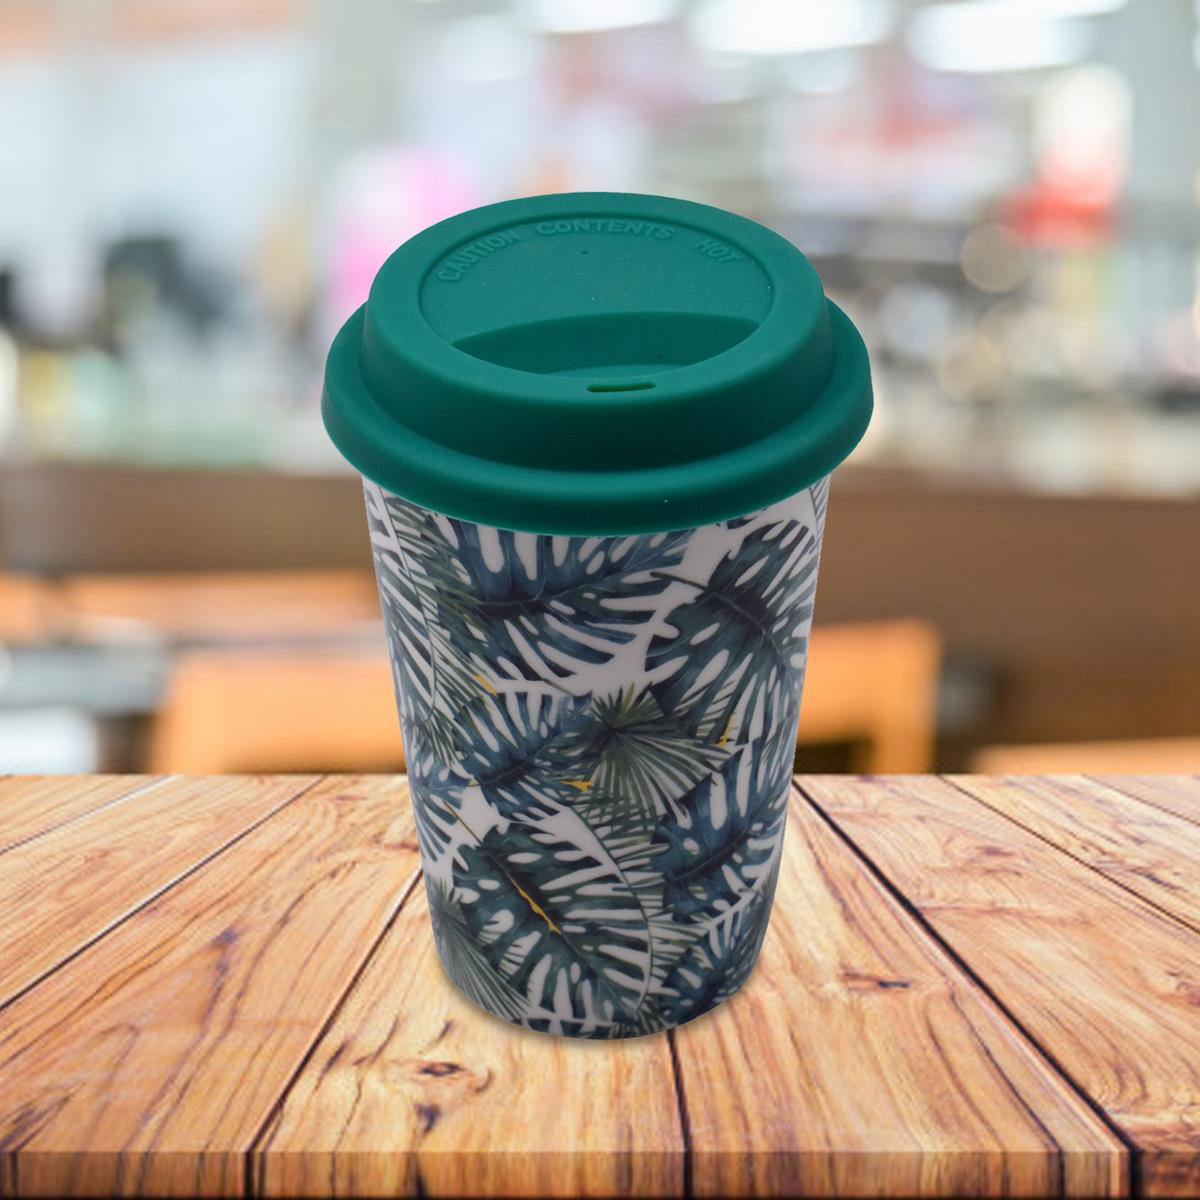 Kookee Ceramic Coffee or Tea Tall Tumbler with Silicone Lid for Office, Home or Gifting - 275ml (BPM4723-B)